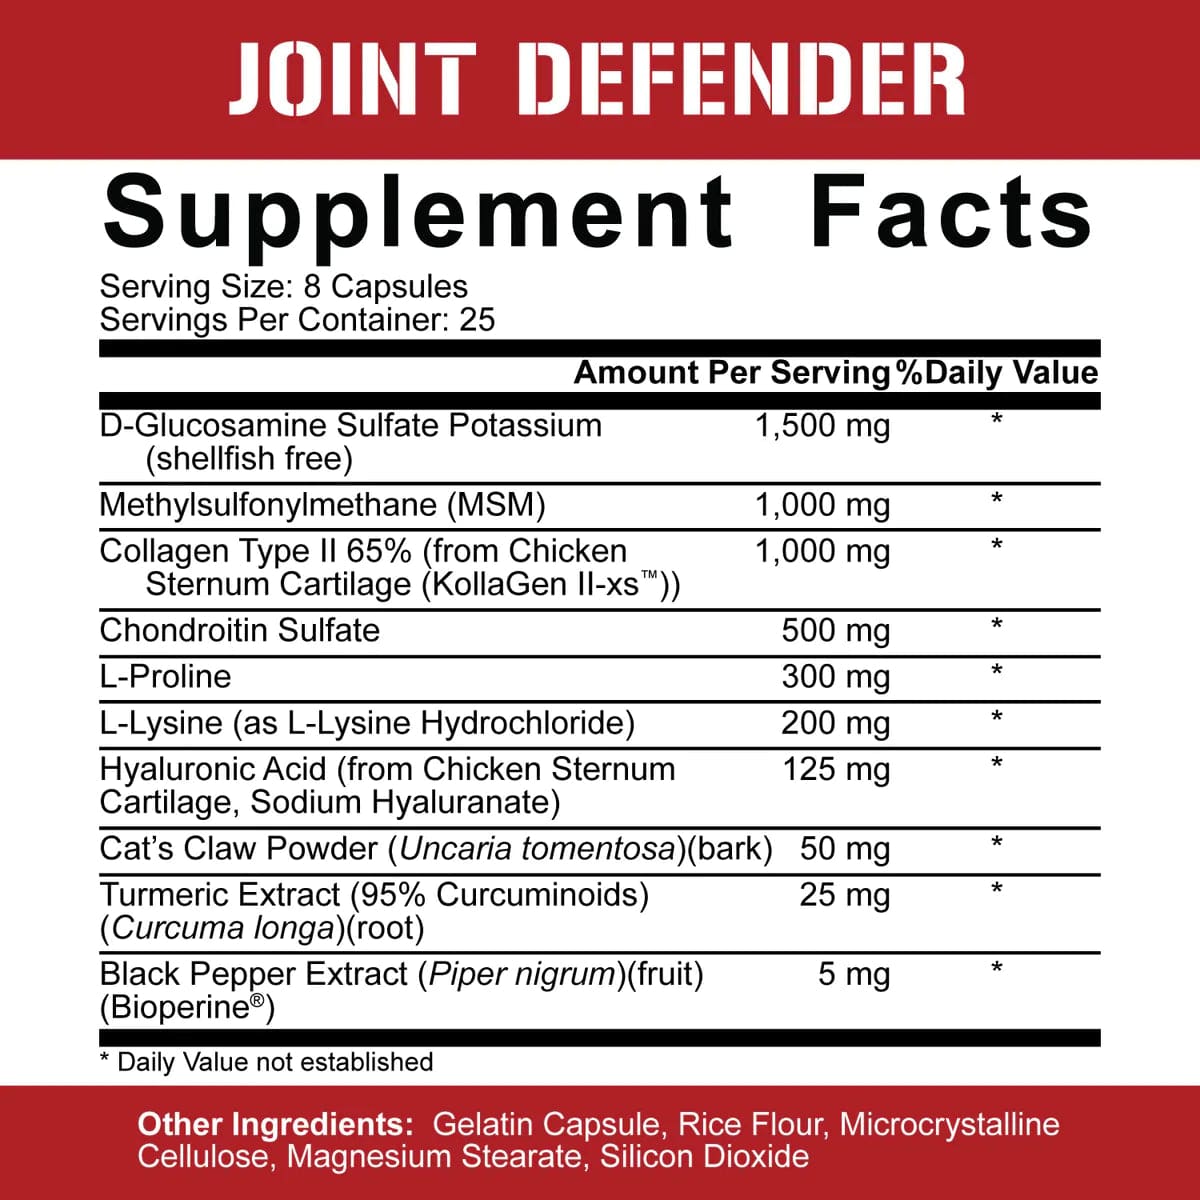 5% NutritionJoint DefenderJoint SupportRED SUPPS